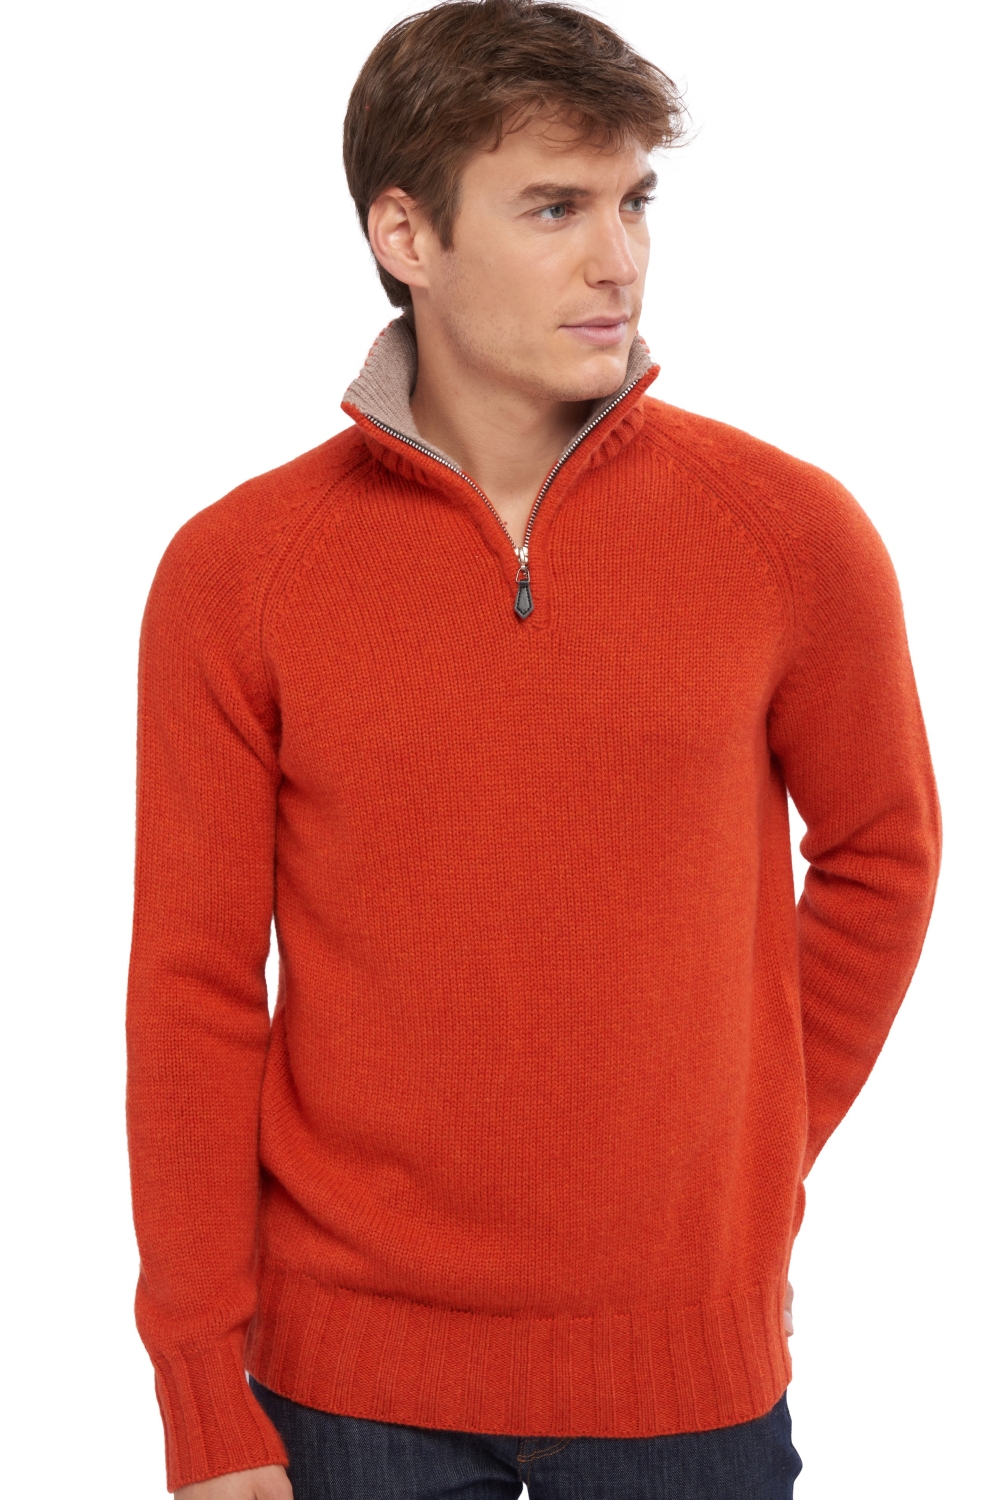 Cachemire pull homme olivier paprika toast 3xl